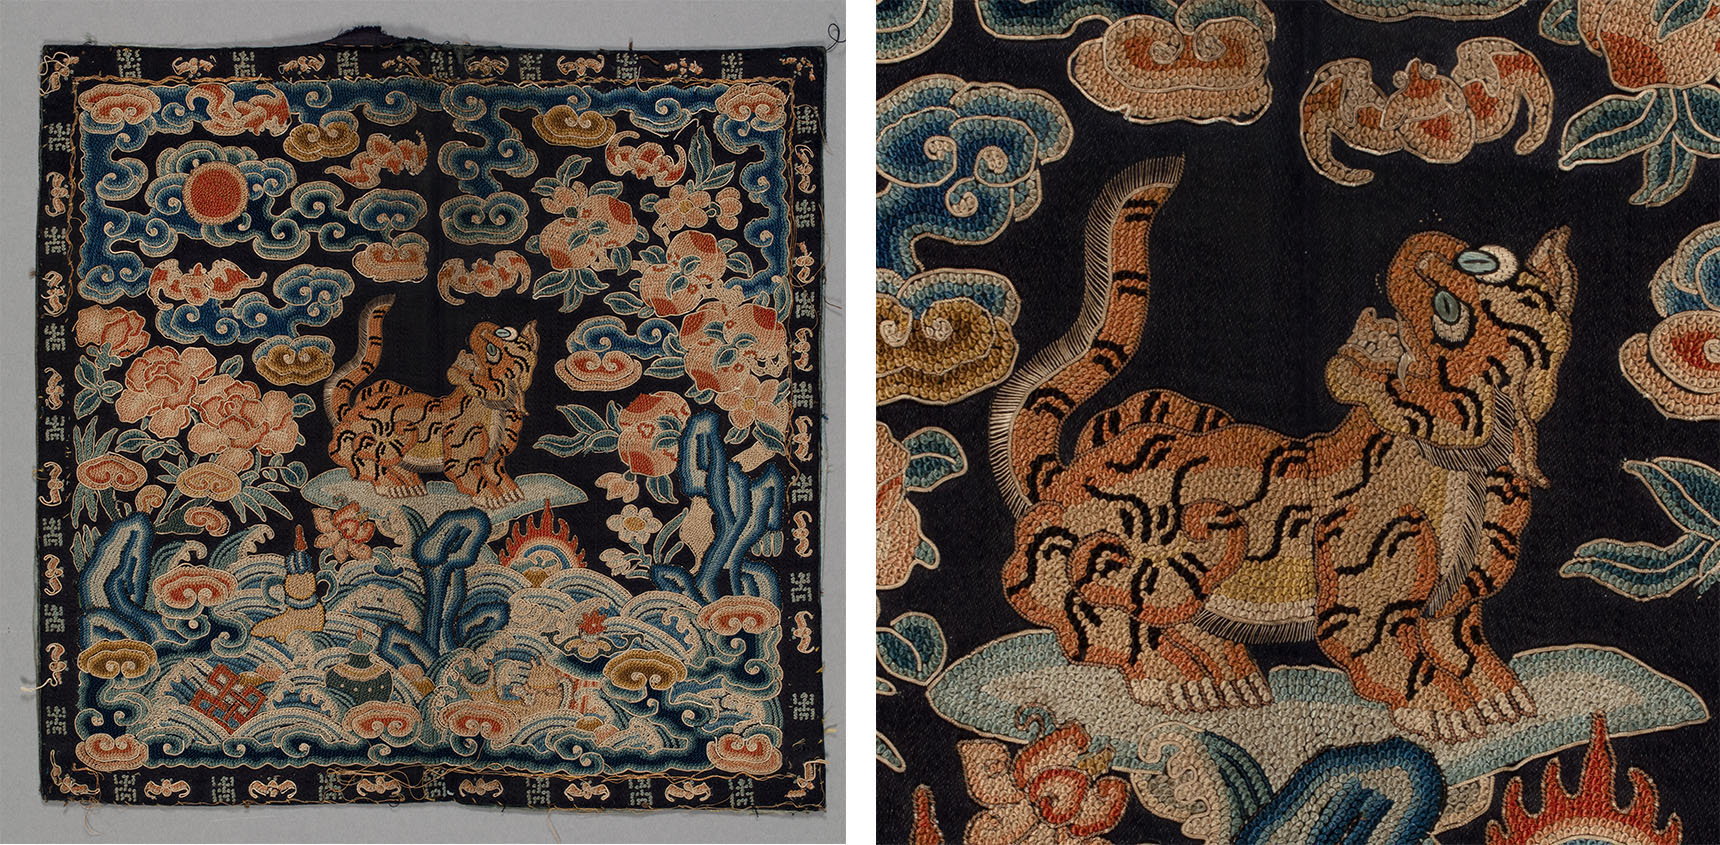 Two images - one of a square textile featuring a tiger that stands on a flat stone in the centre of the panel with its head turning backwards towards the sun - a red circle on the left. The tiger is surrounded by different symbols of fortune and longevity. The other image is a A close-up view of a tiger that was created by using decorative embroidery knots of different colours